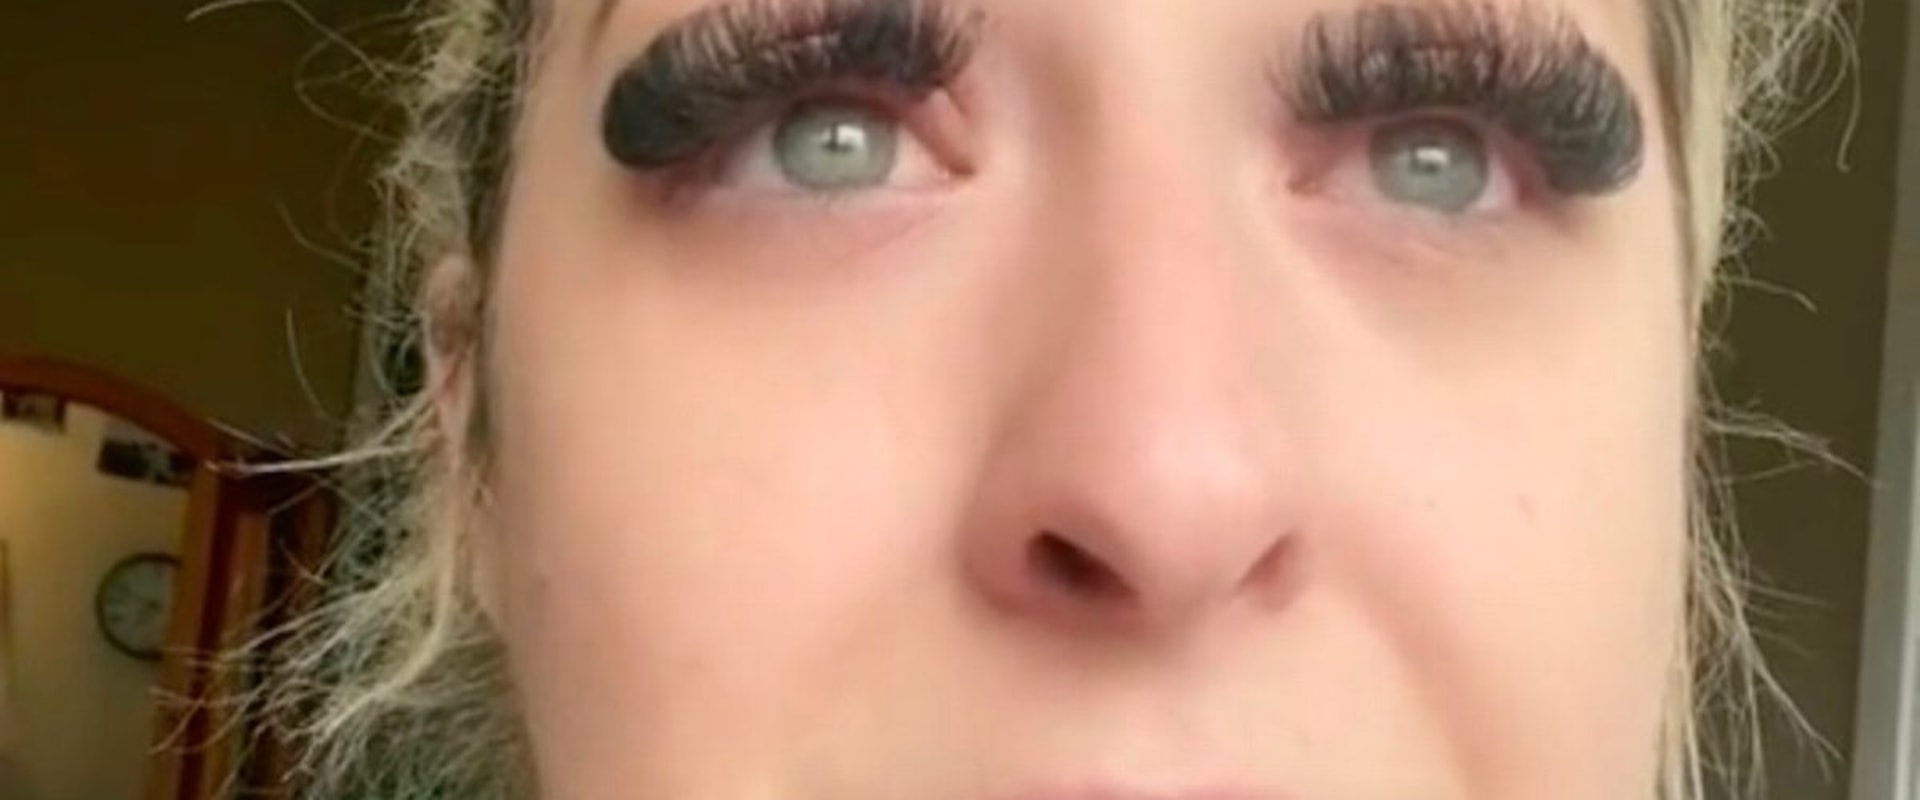 Why lash extensions are bad?